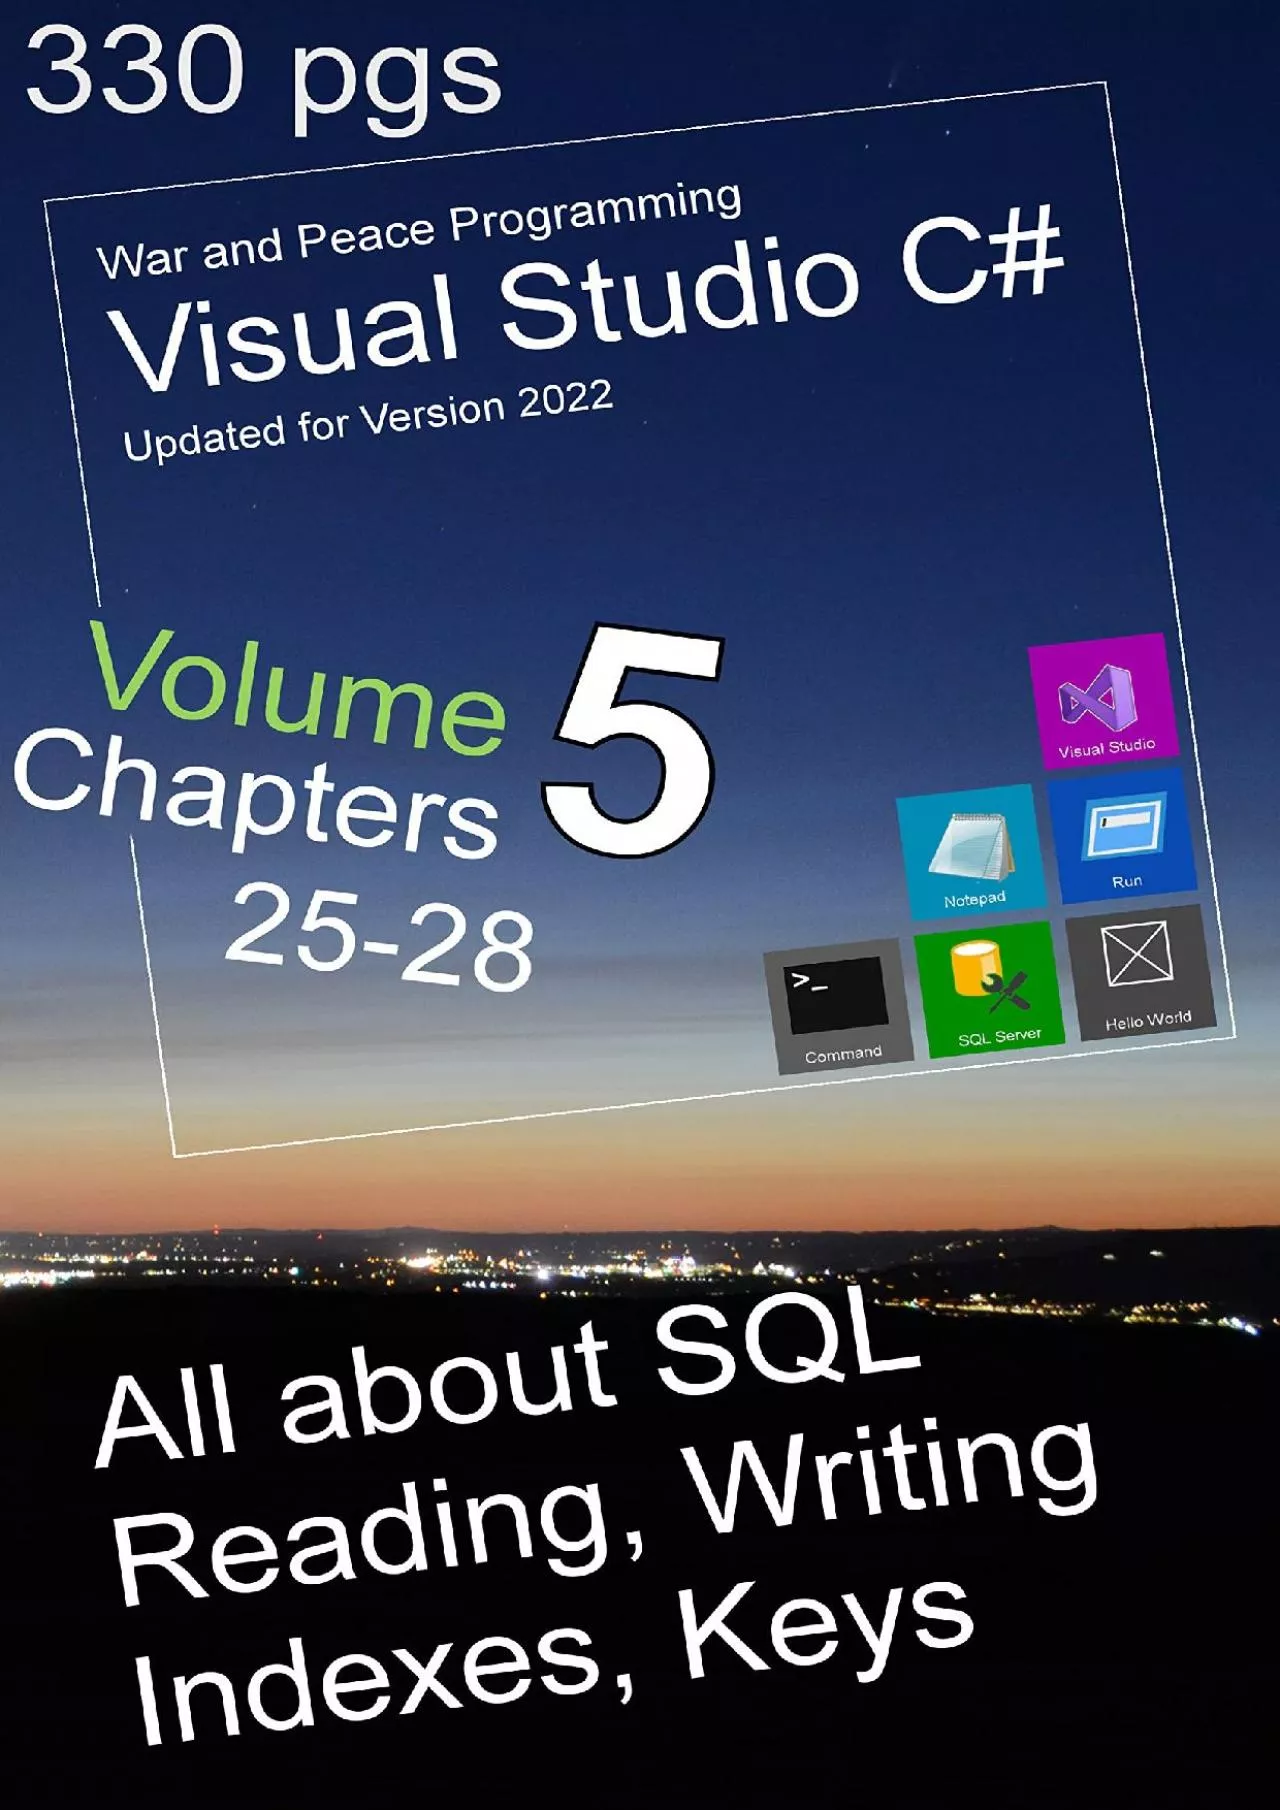 [READ]-War and Peace - C Programming 5 Vol.: Programming in C Visual Studio - All about